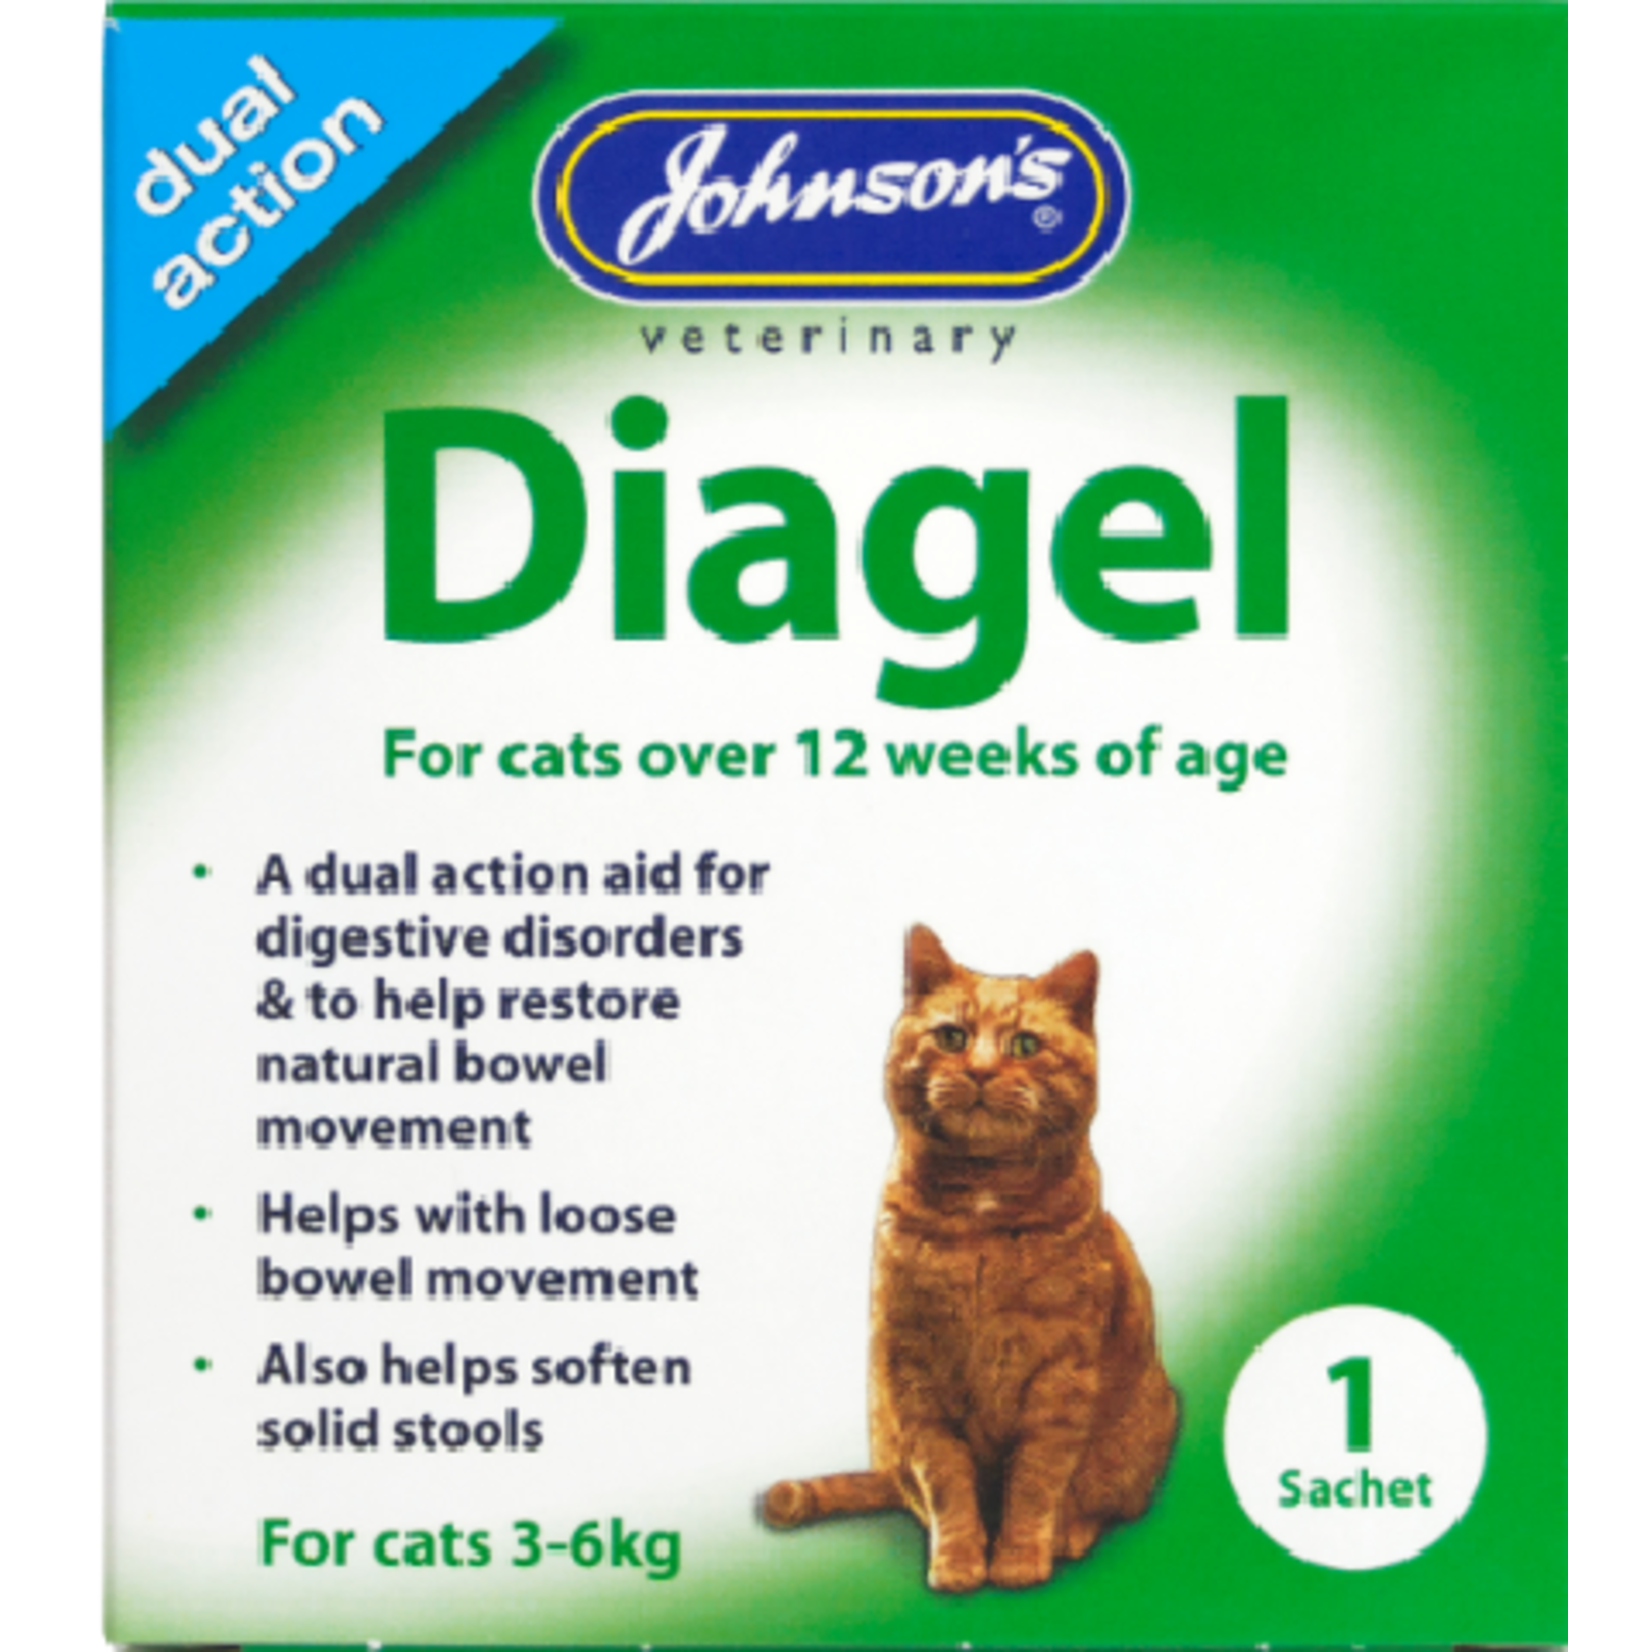 Johnson's Veterinary Diagel Dual Action Aid for Digestive Disorders in Cats, 1 Sachet